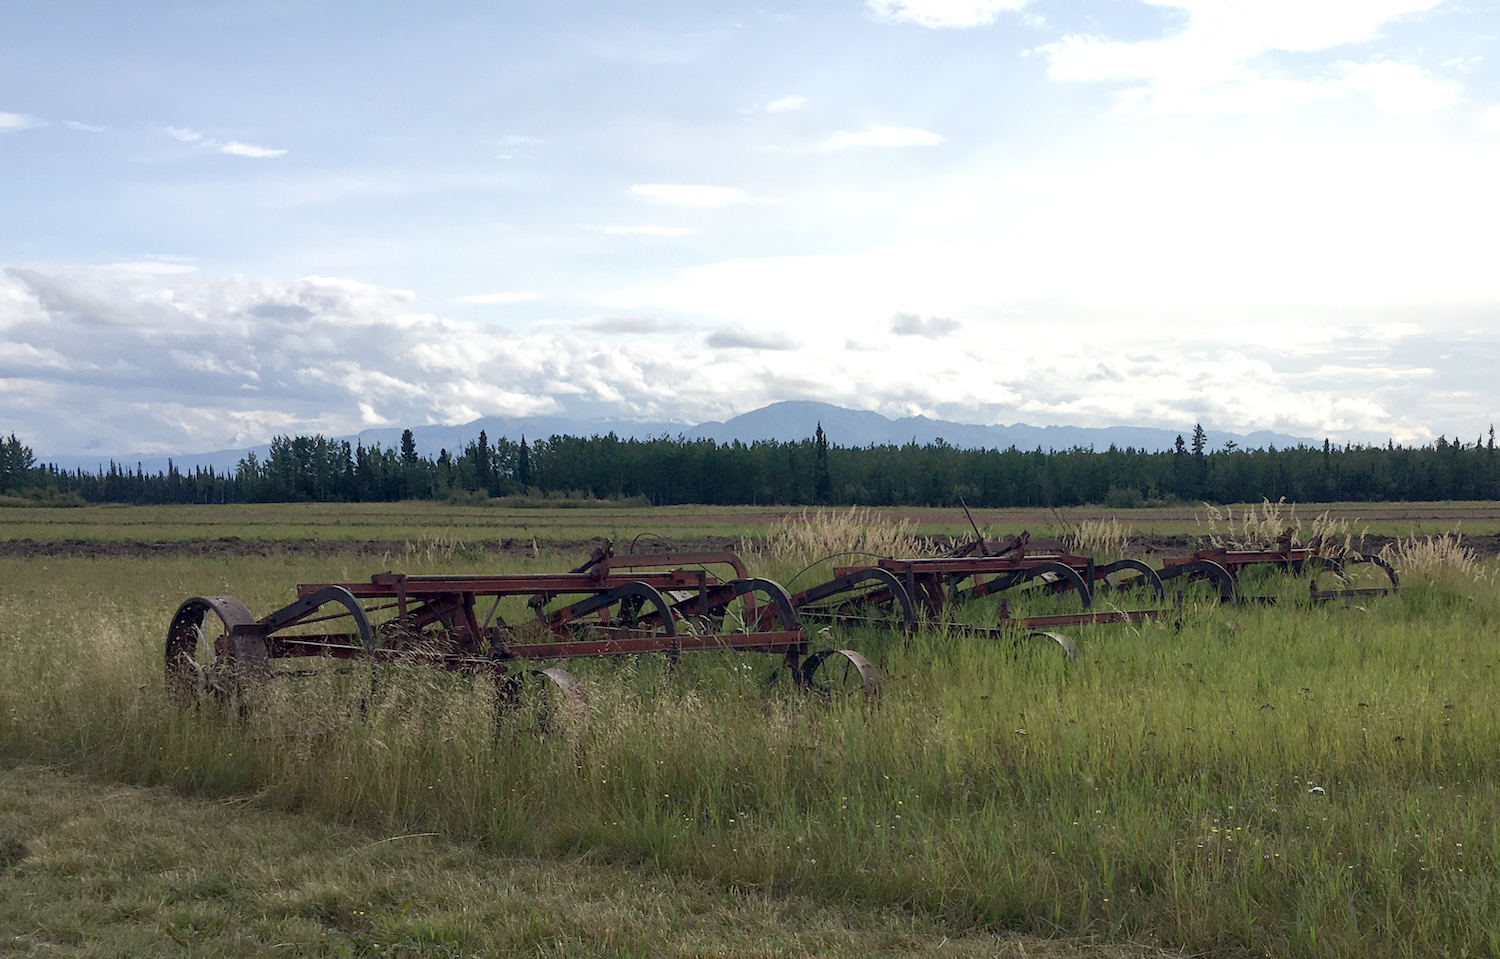 Old farm equipment sits in tall grass within a field, with evergreen trees and mountains in the background.